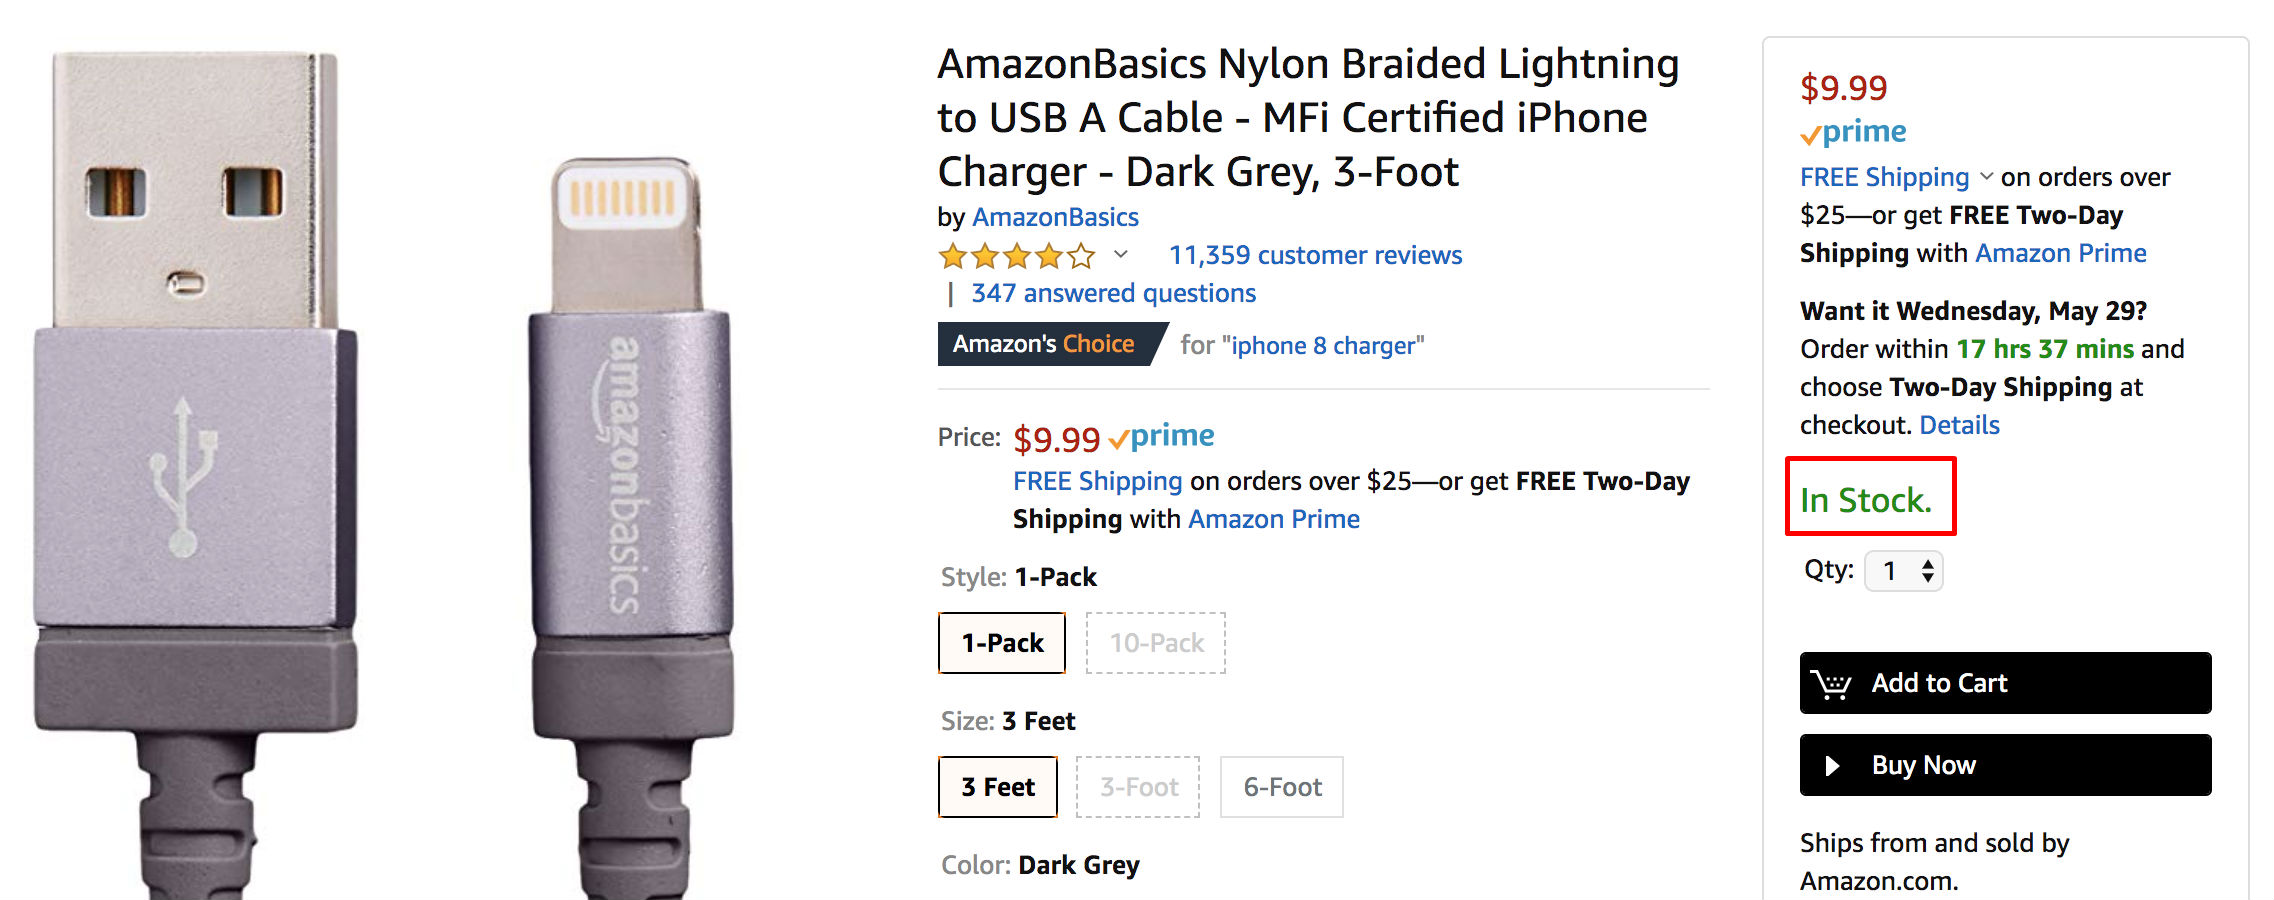 An example Product Landing Page on Amazon.com showing "In Stock." availability message (Highlighted)